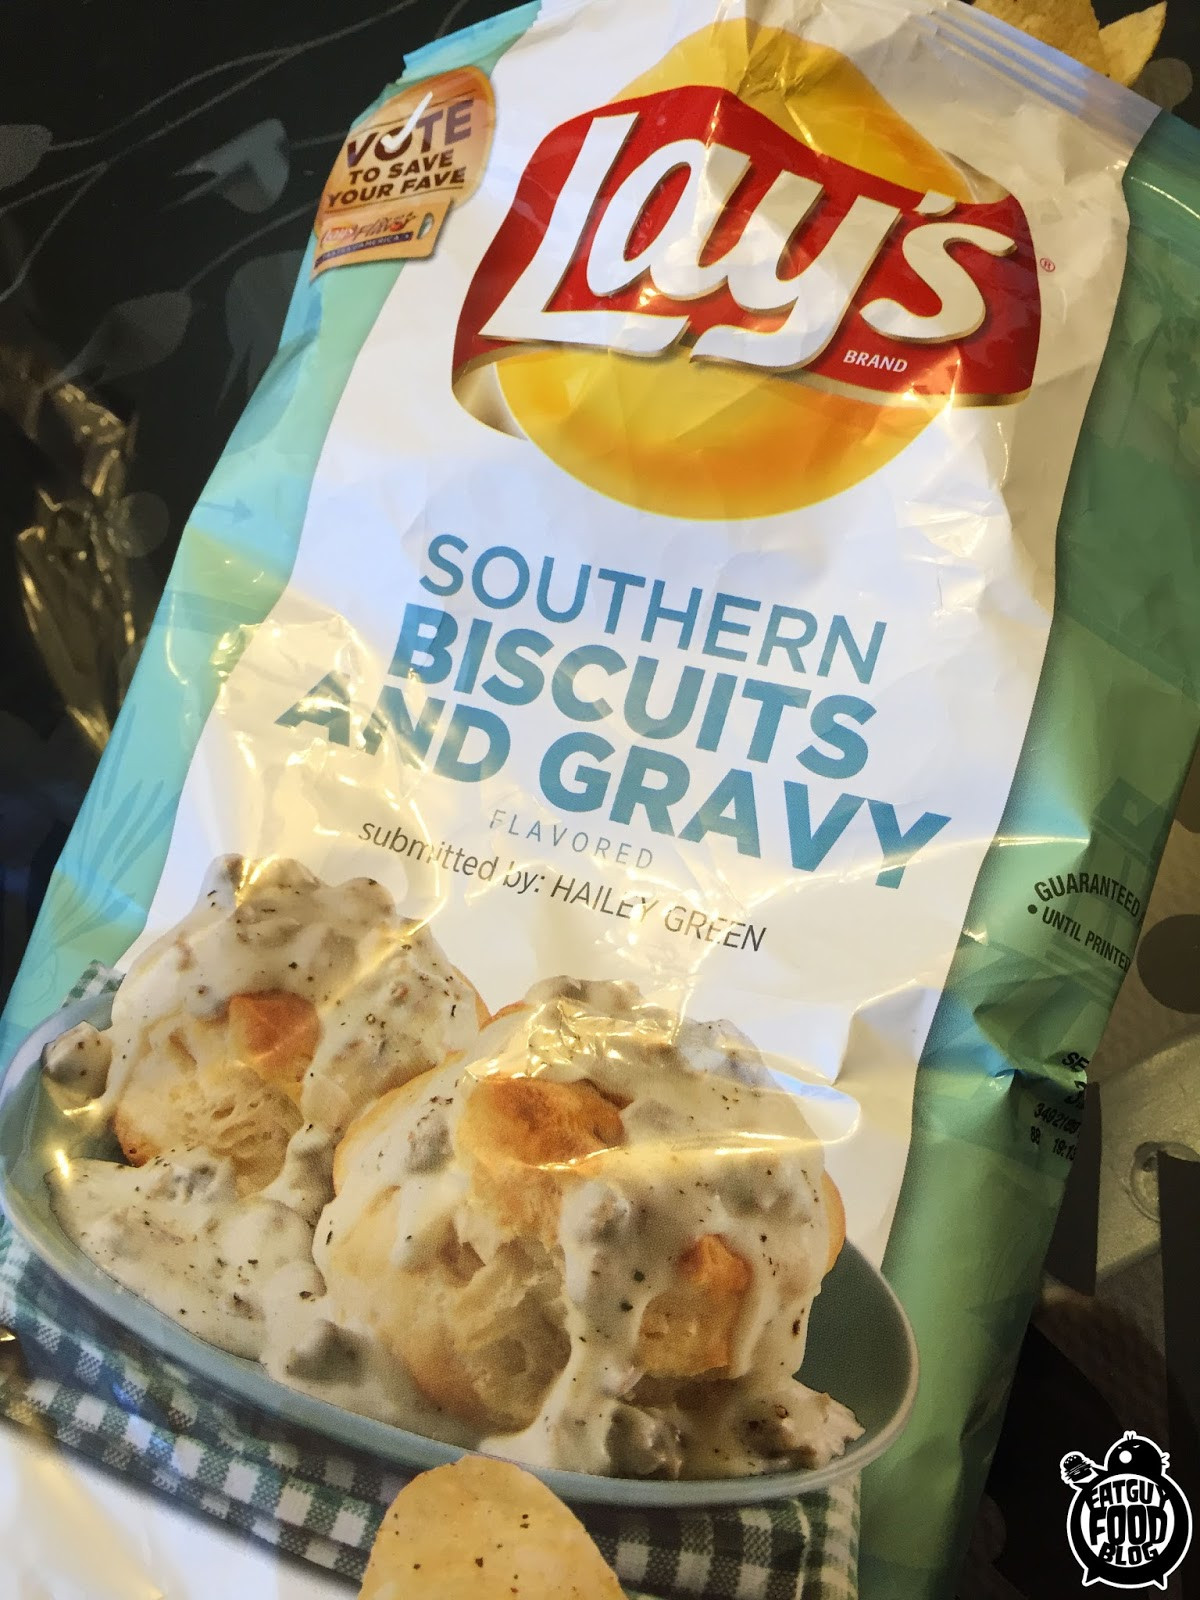 Lays Southern Biscuit And Gravy
 FATGUYFOODBLOG Lays Southern Biscuits and Gravy New York